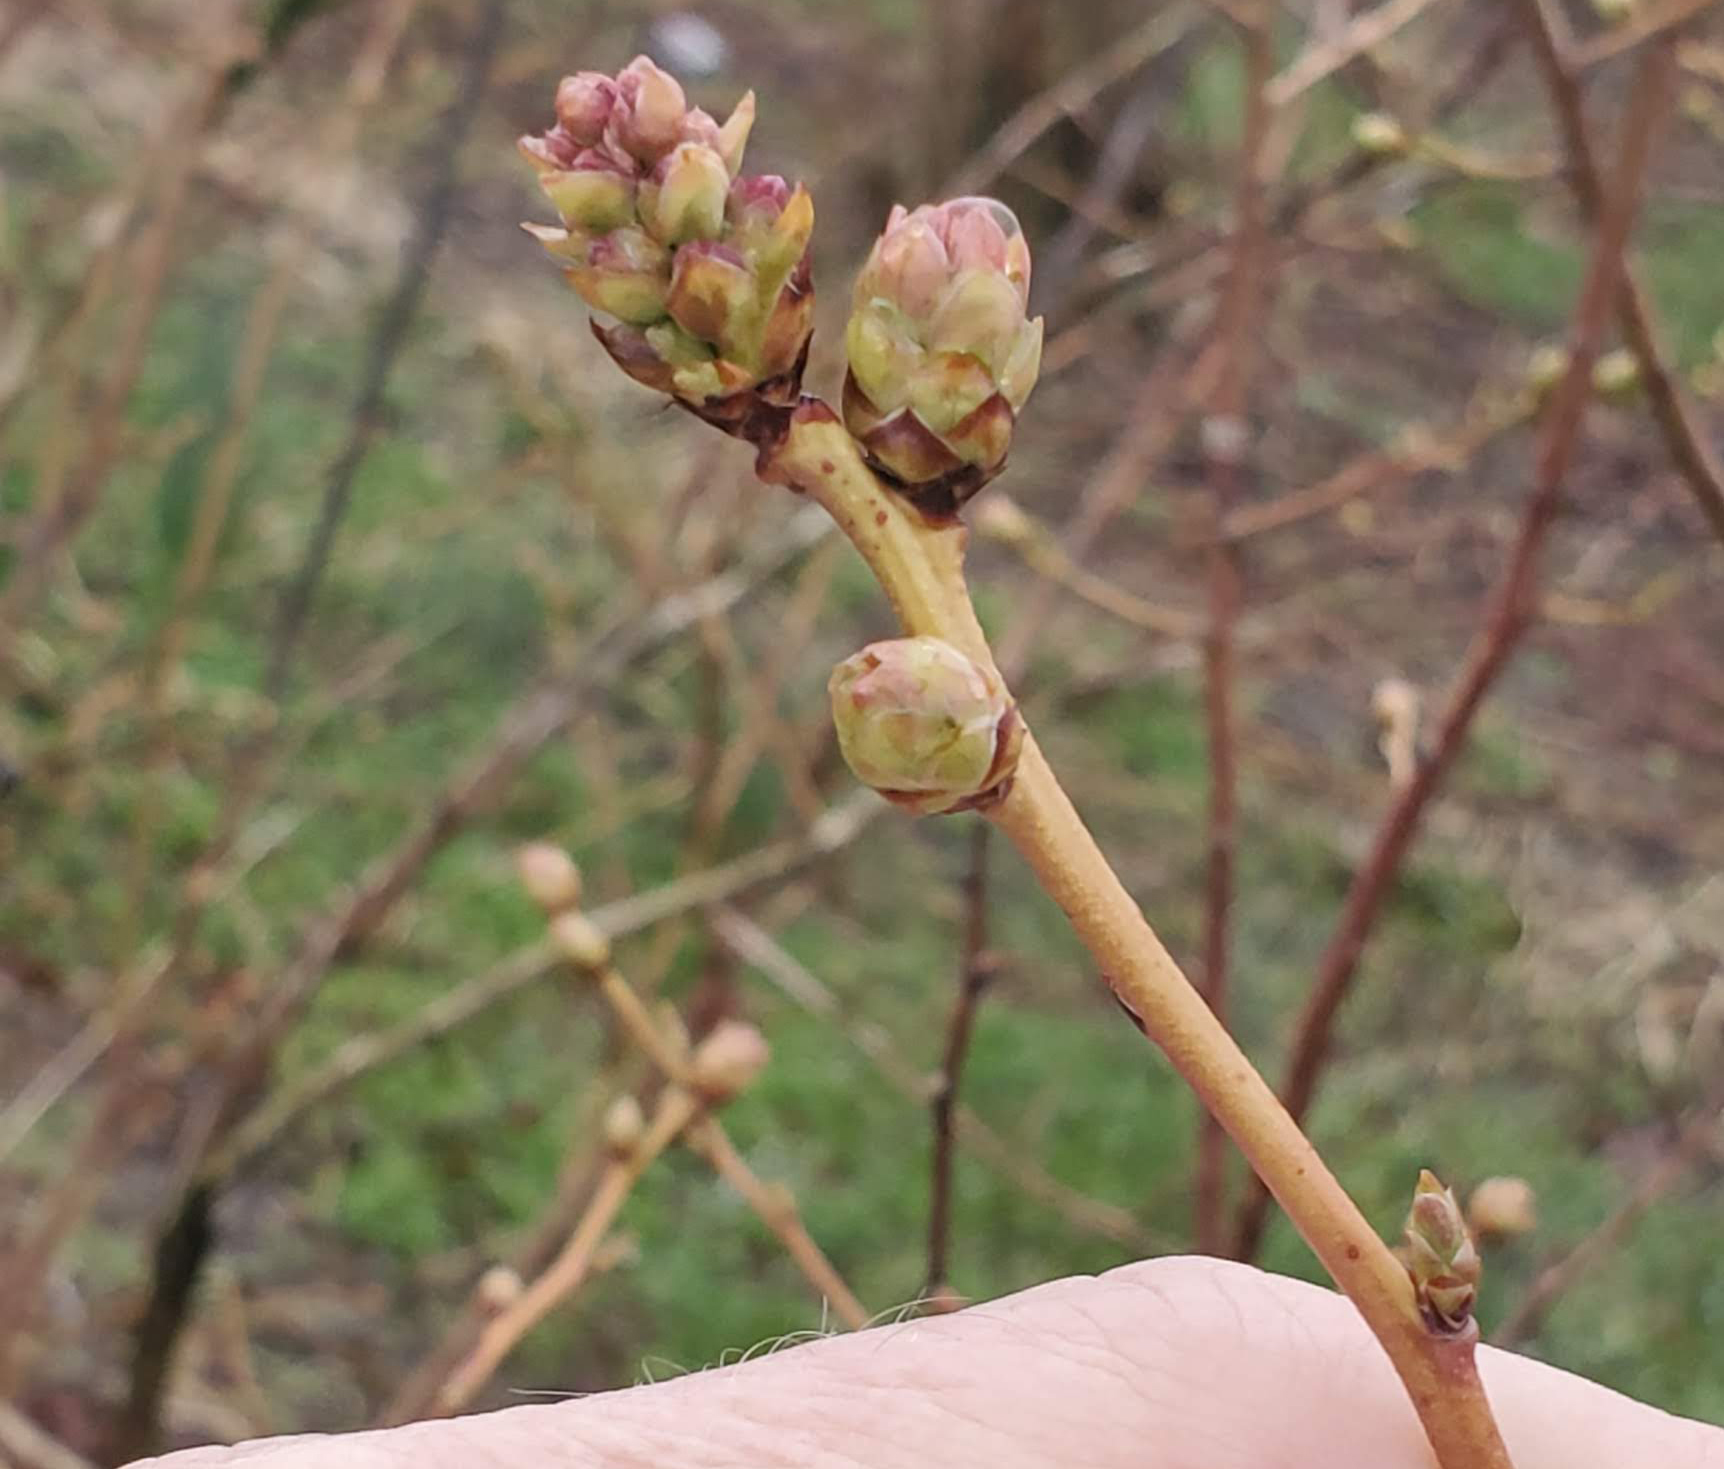 Blueberry flower buds are opening